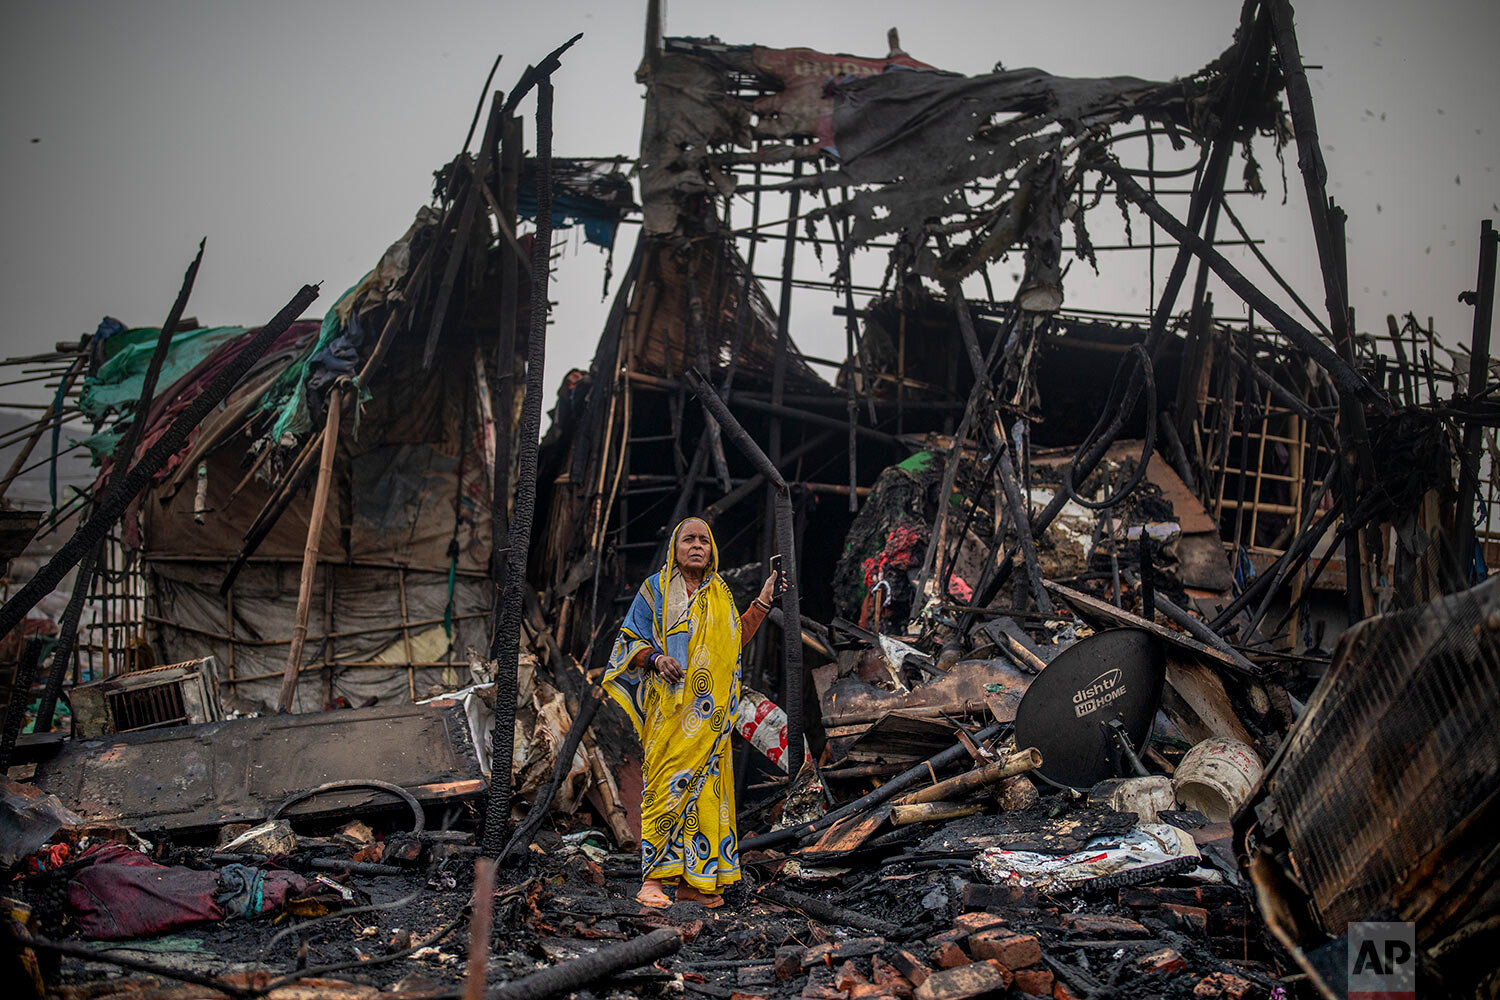  A woman stands on the debris of a fire at a slum area in New Delhi, India, Saturday, Jan. 23, 2021. More than 50 huts of a slum inhabited mostly by ragpickers were gutted in a fire that broke out Saturday afternoon.  (AP Photo/Altaf Qadri) 